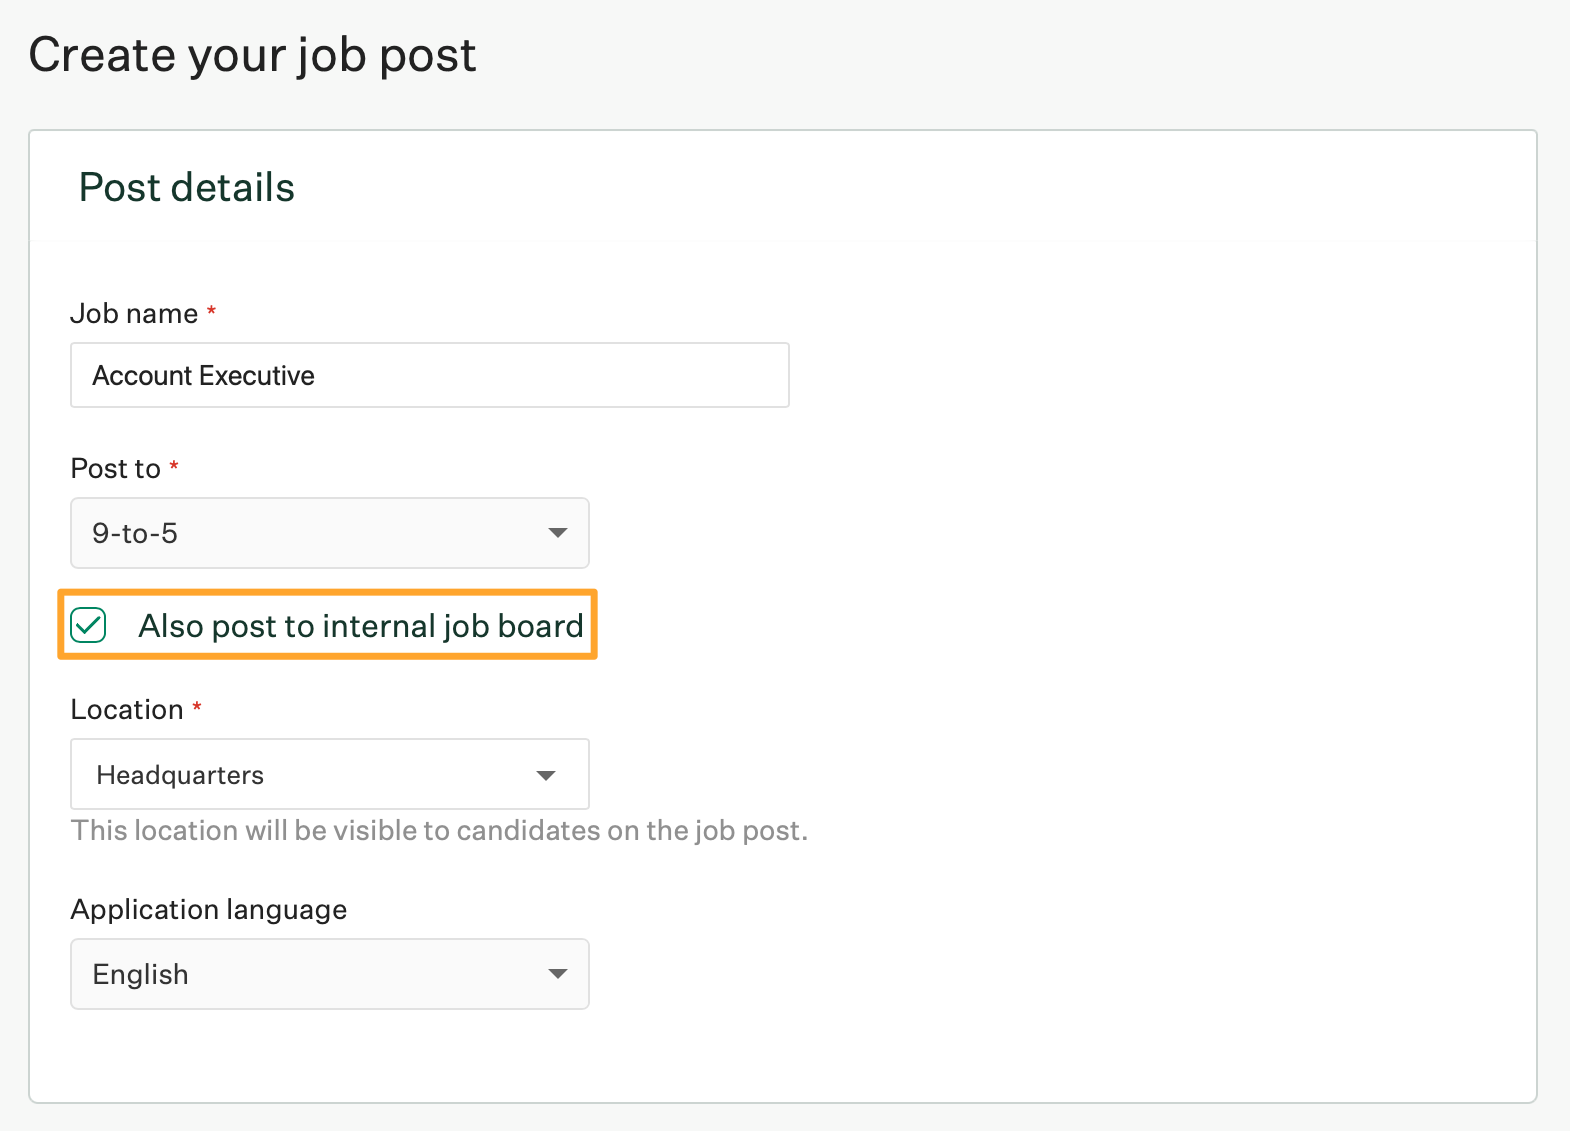 Create your job post page shows a new  Also post to internal job board  option highlighted in a marigold emphasis box